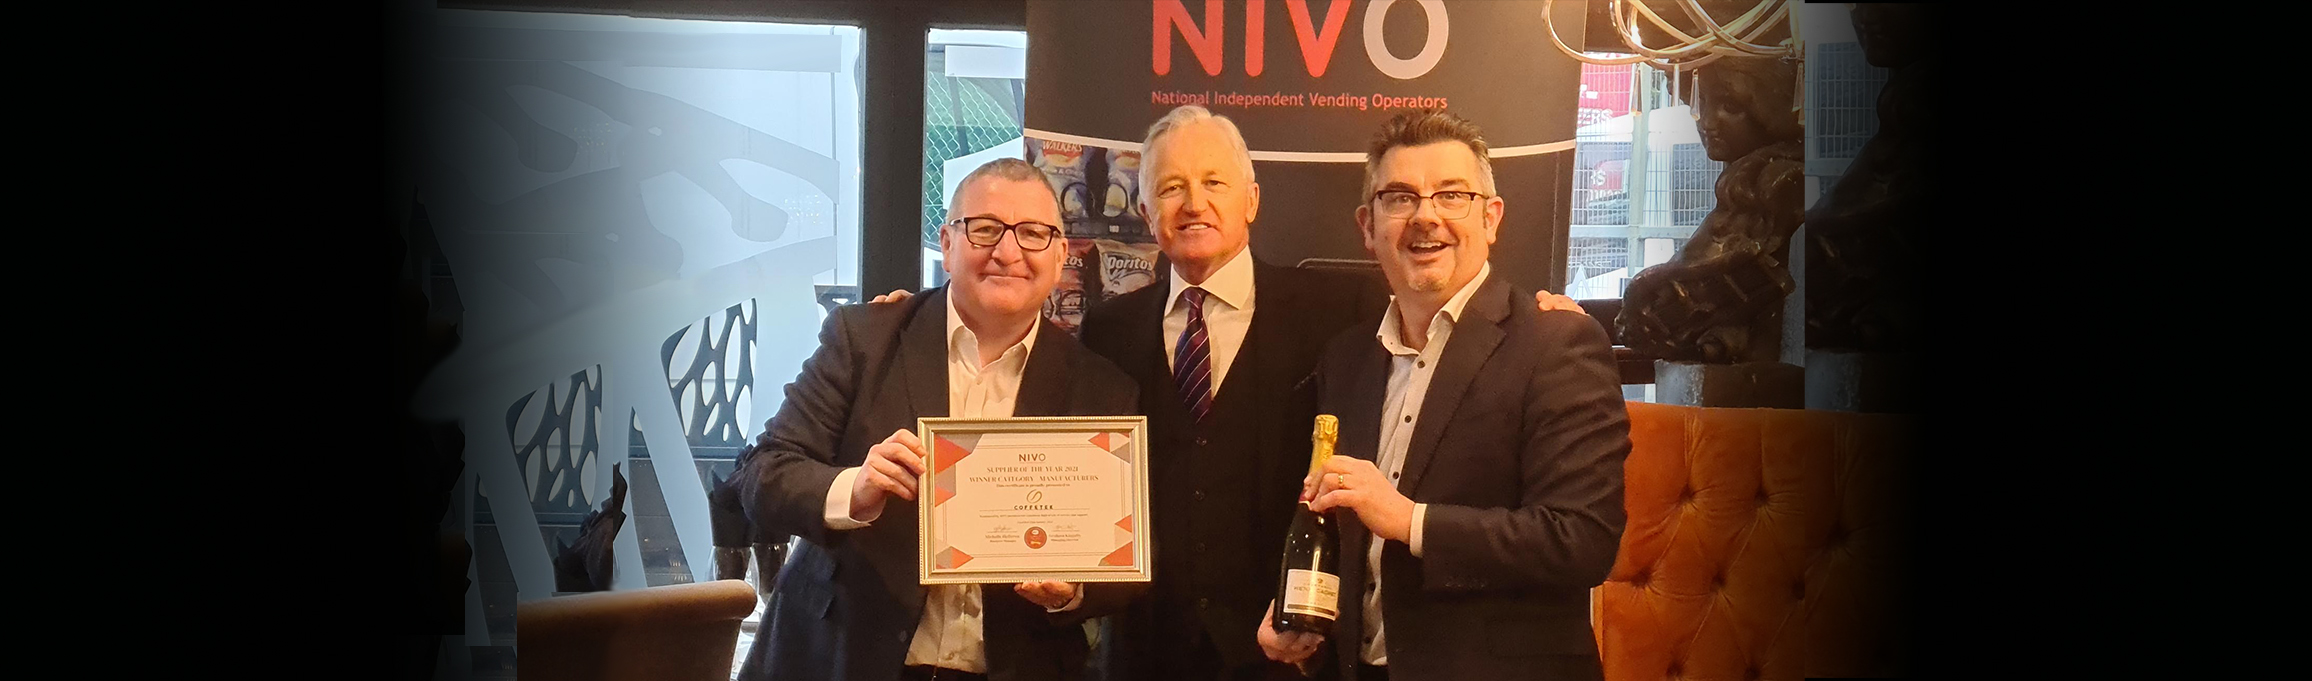 Coffetek has once again been awarded the best equipment supplier by NIVO